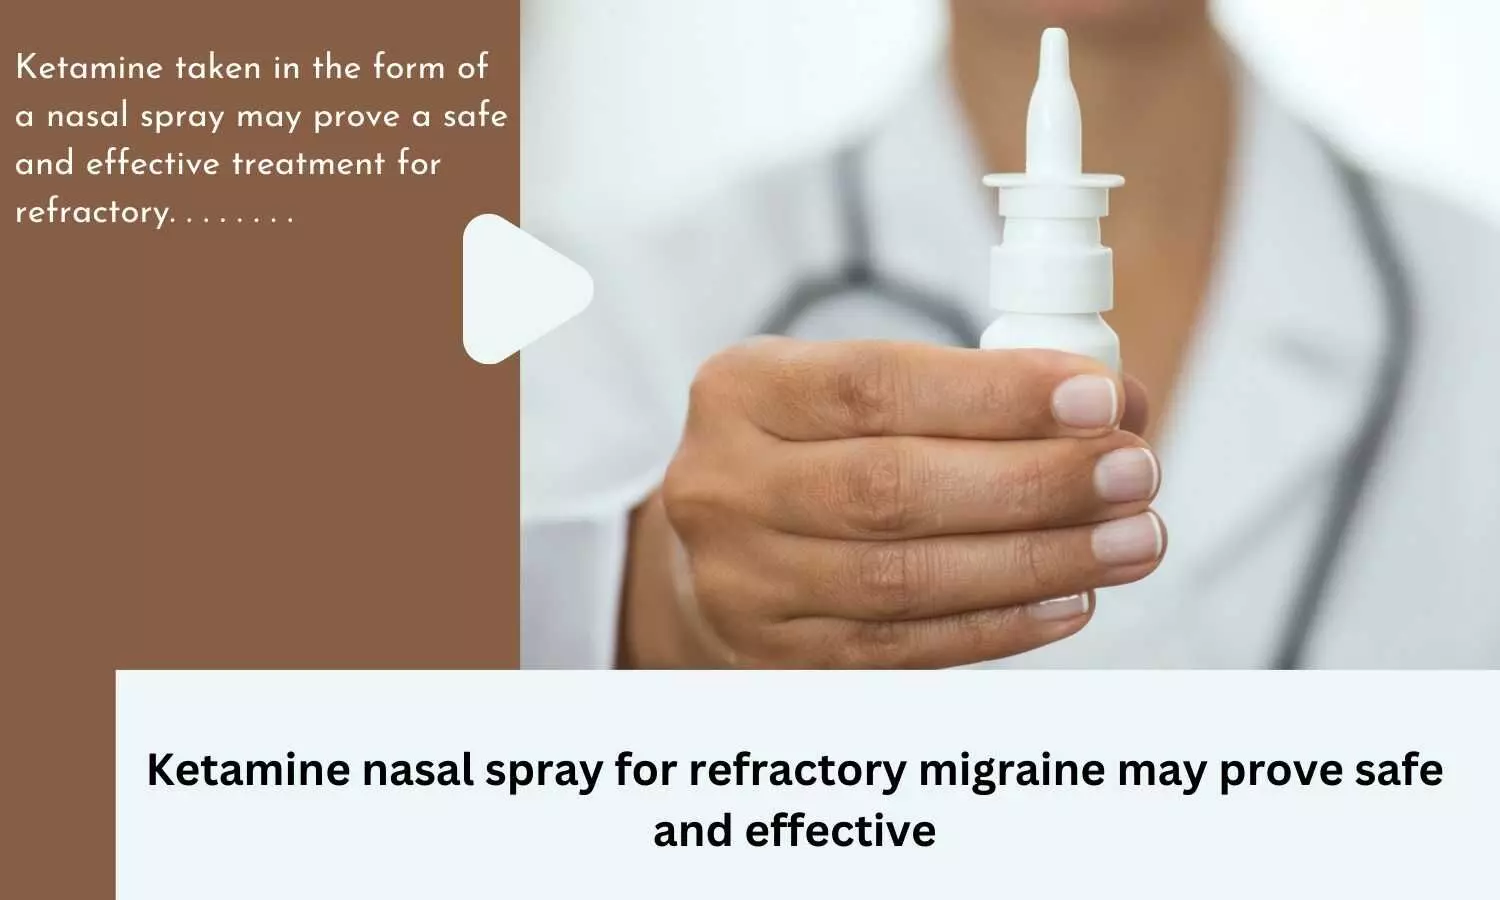 Ketamine nasal spray for refractory migraine may prove safe and effective